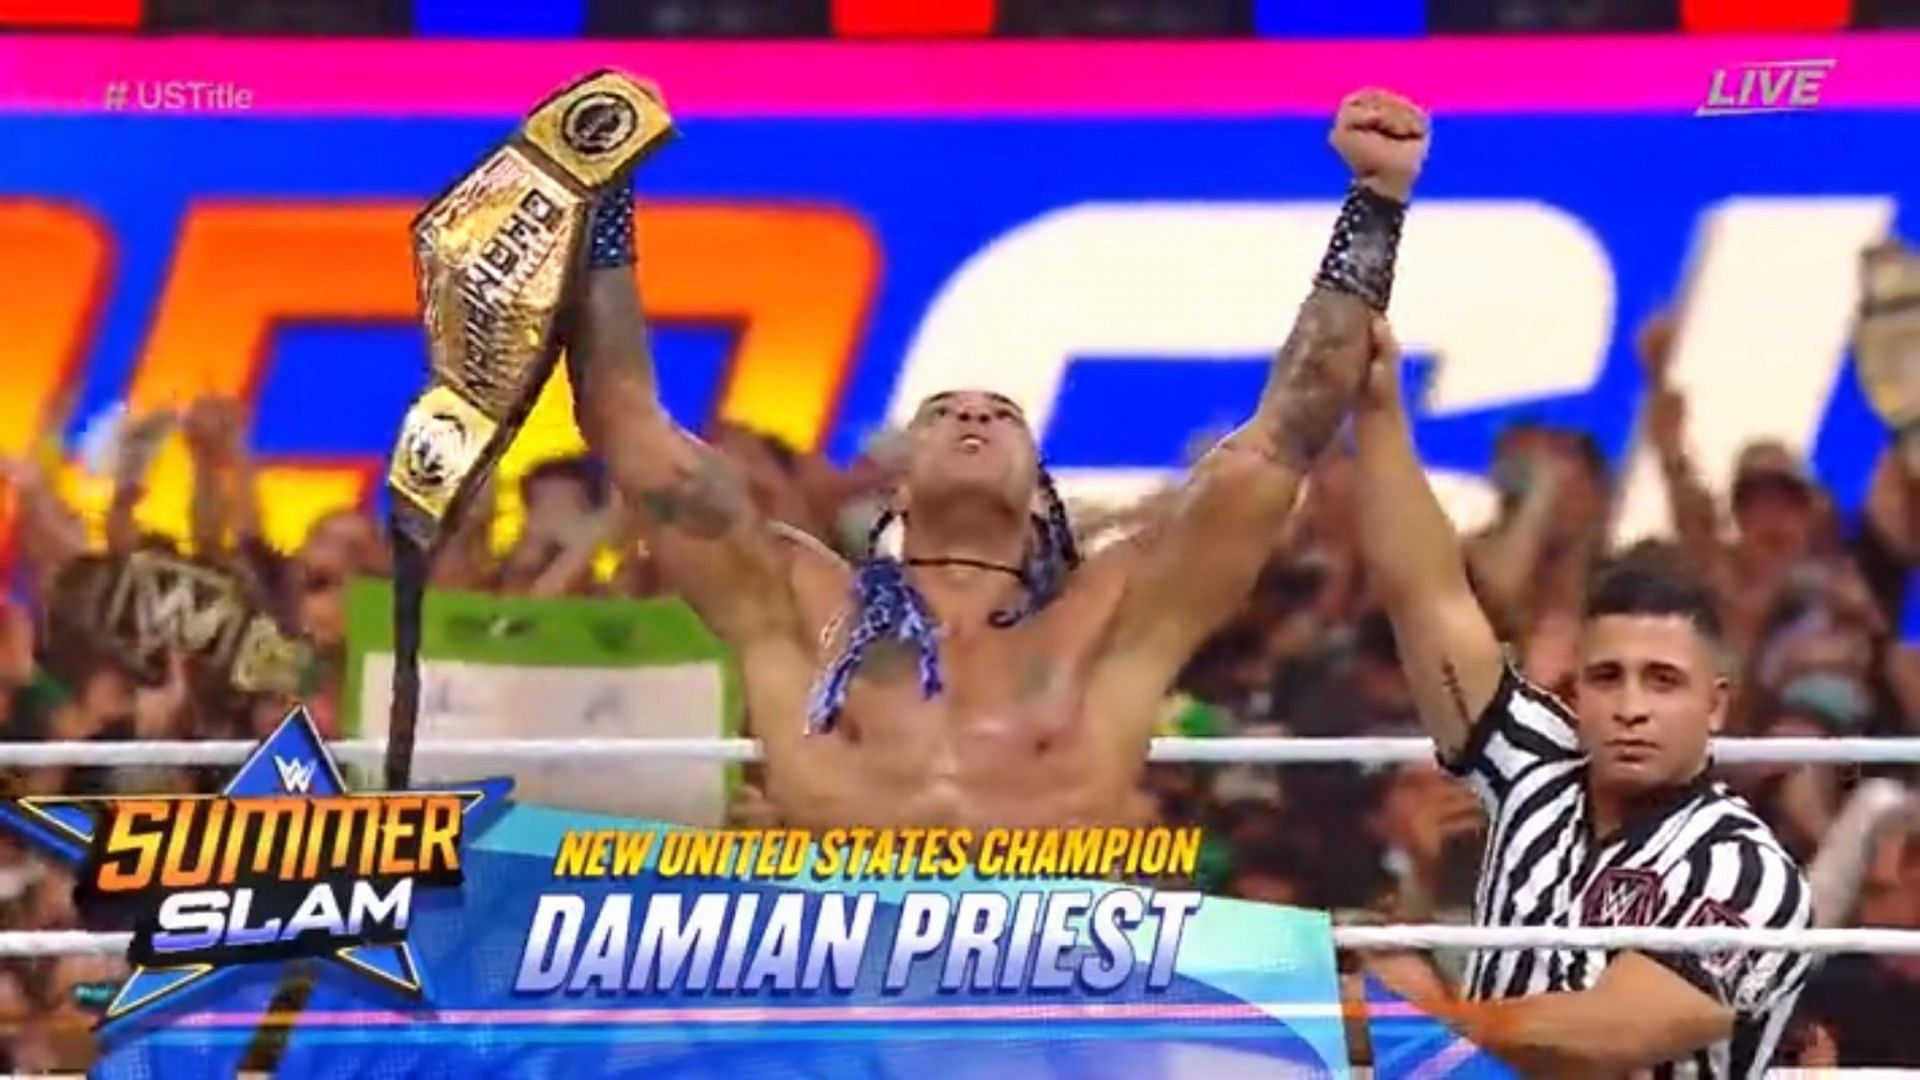 Damian Priest has been holding the United States Championship for months now